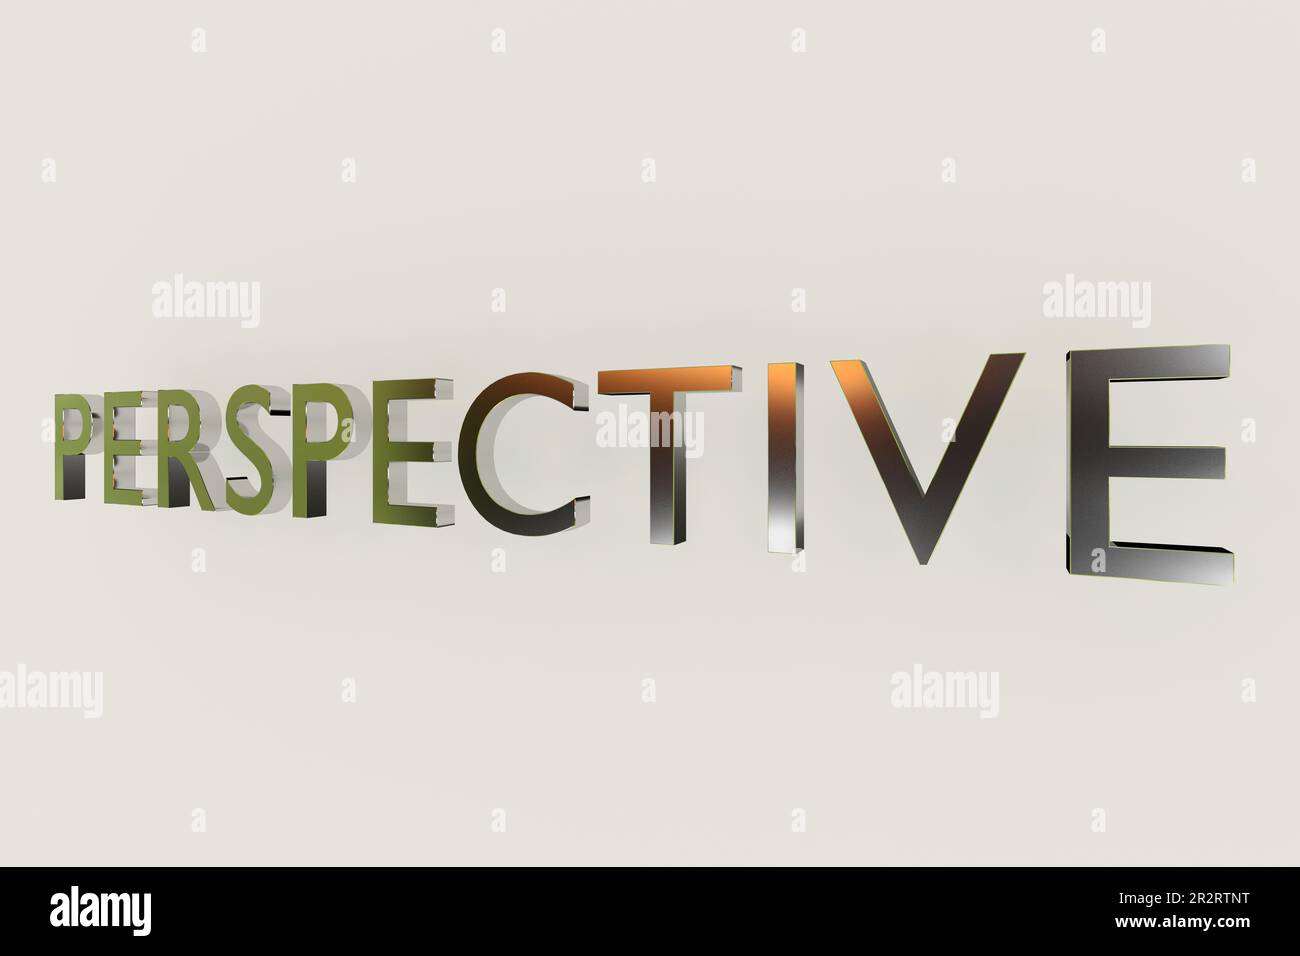 3D illustration of letters forming the word PERSPECTIVE, isolated over gray background. Stock Photo